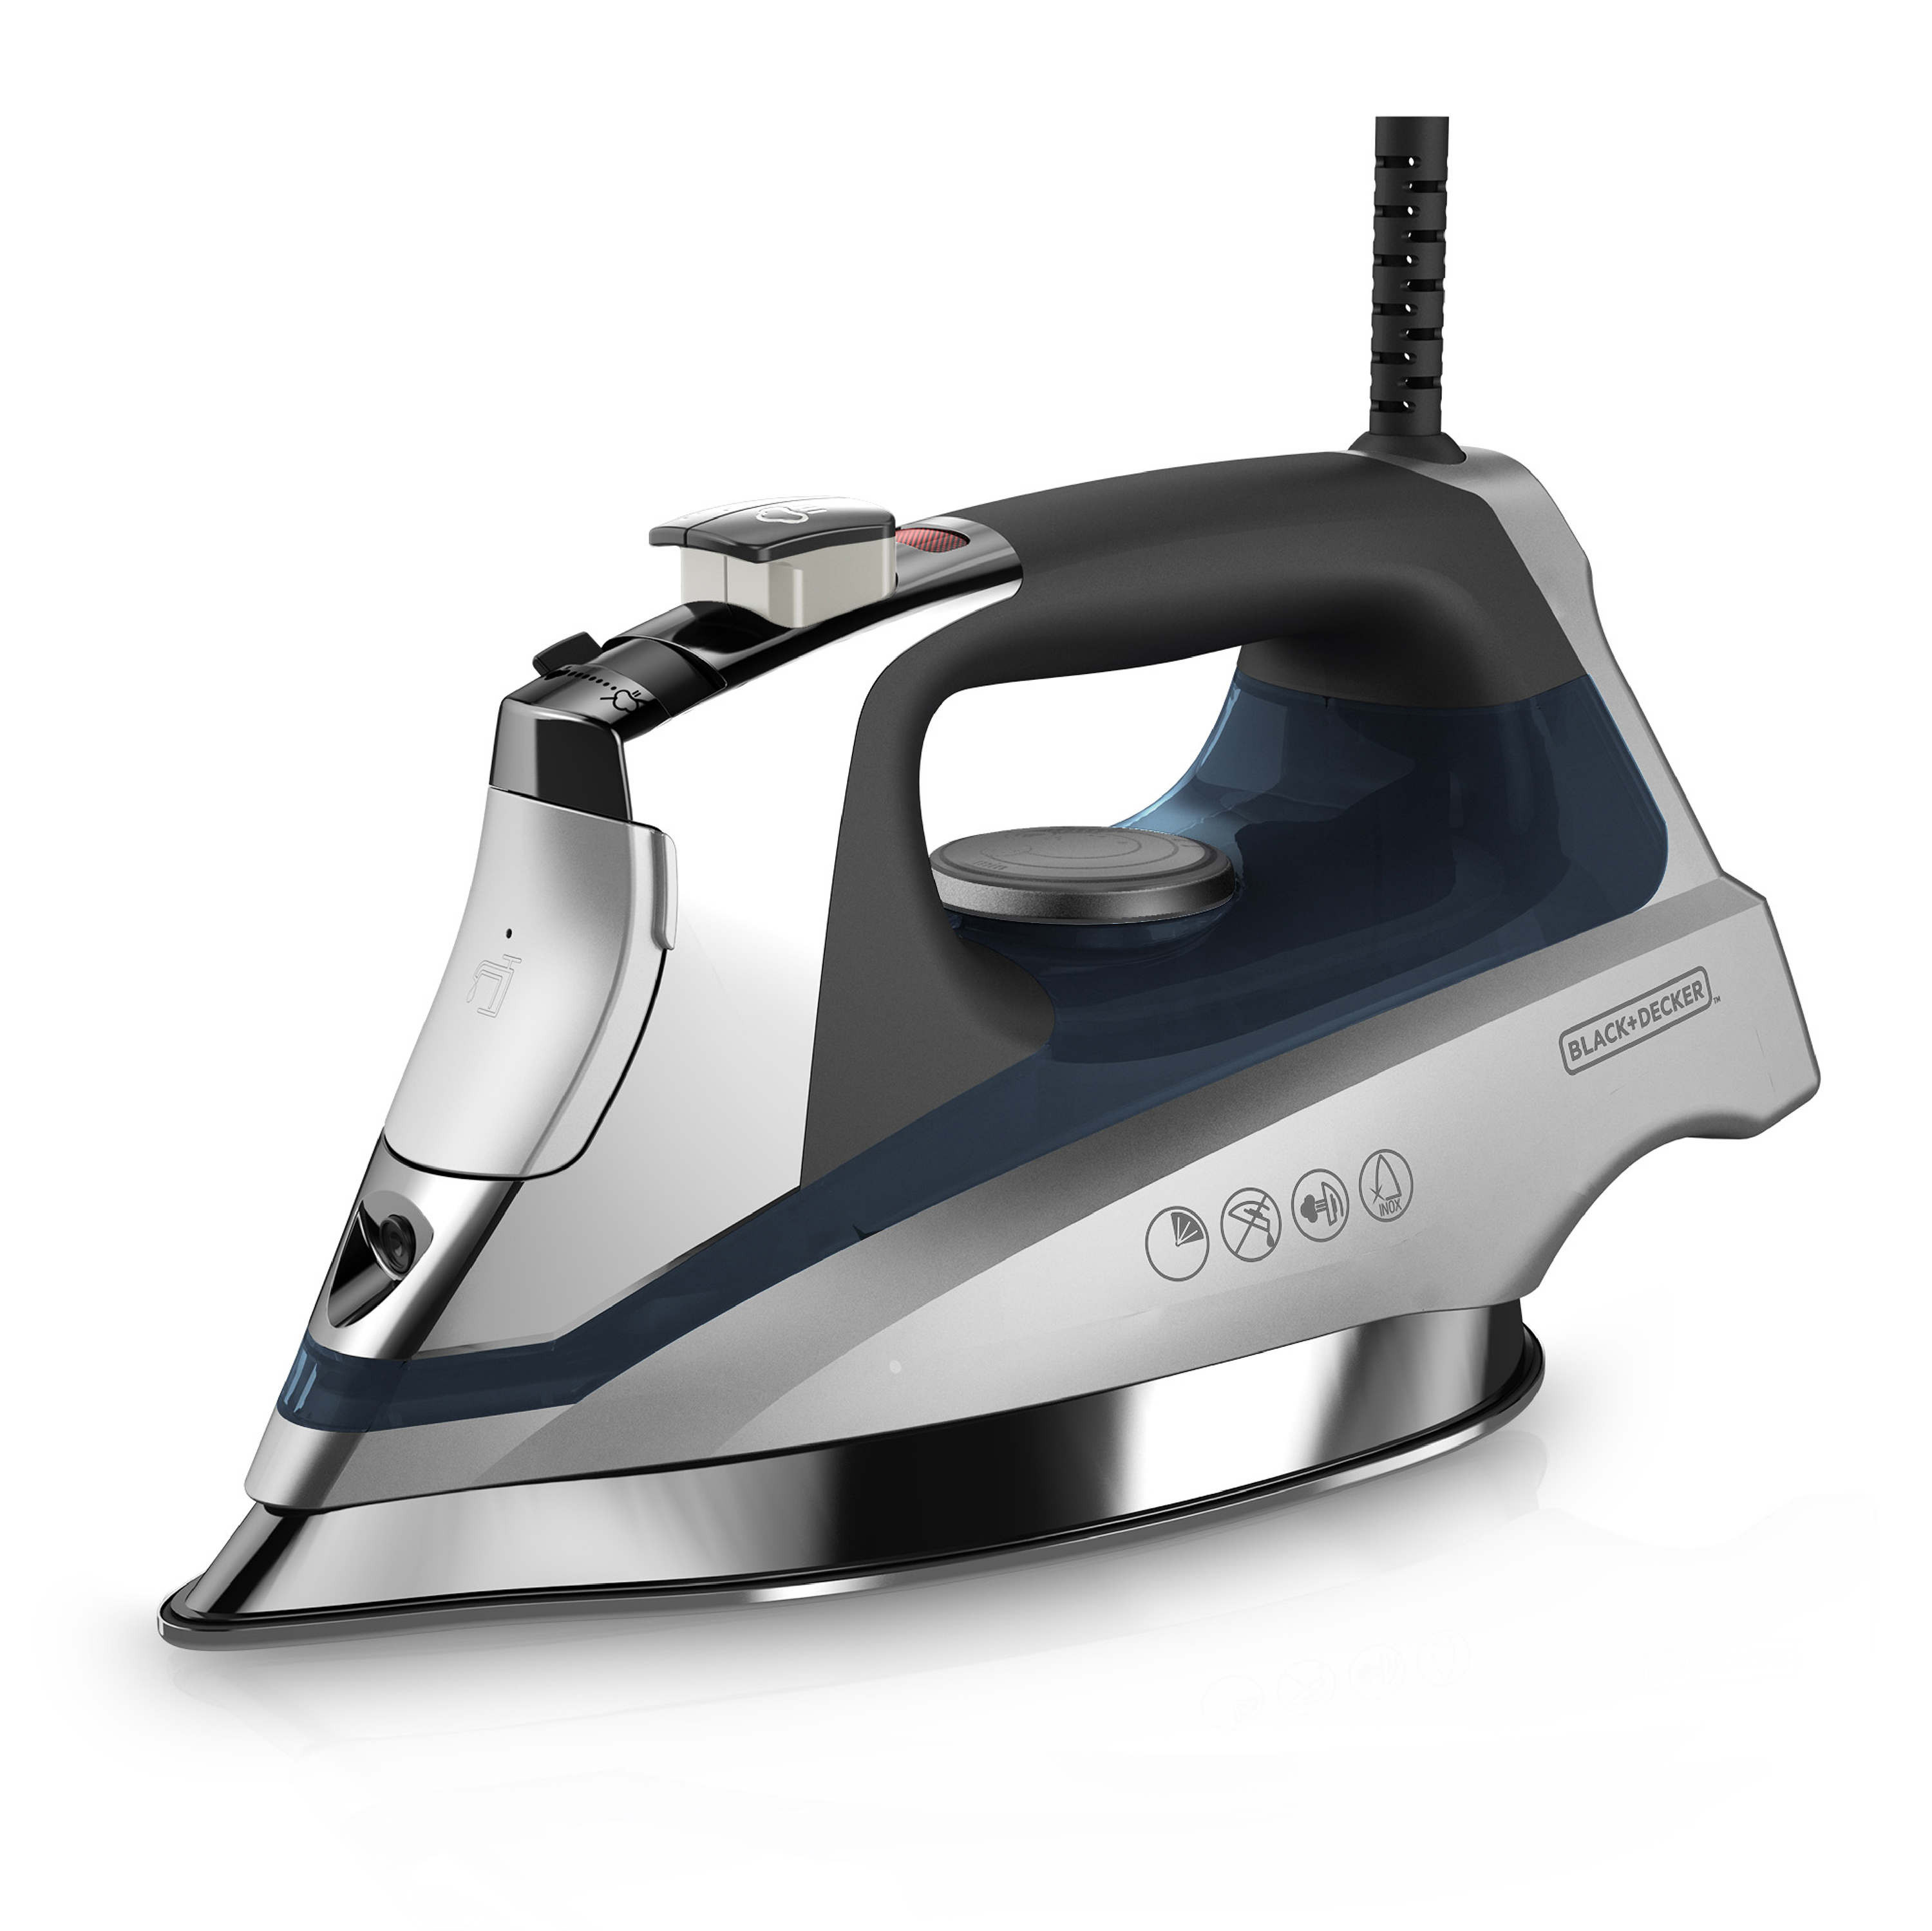 BLACK+DECKER Allure Digital Clothing Iron, Stainless Soleplate D3030 - image 1 of 14